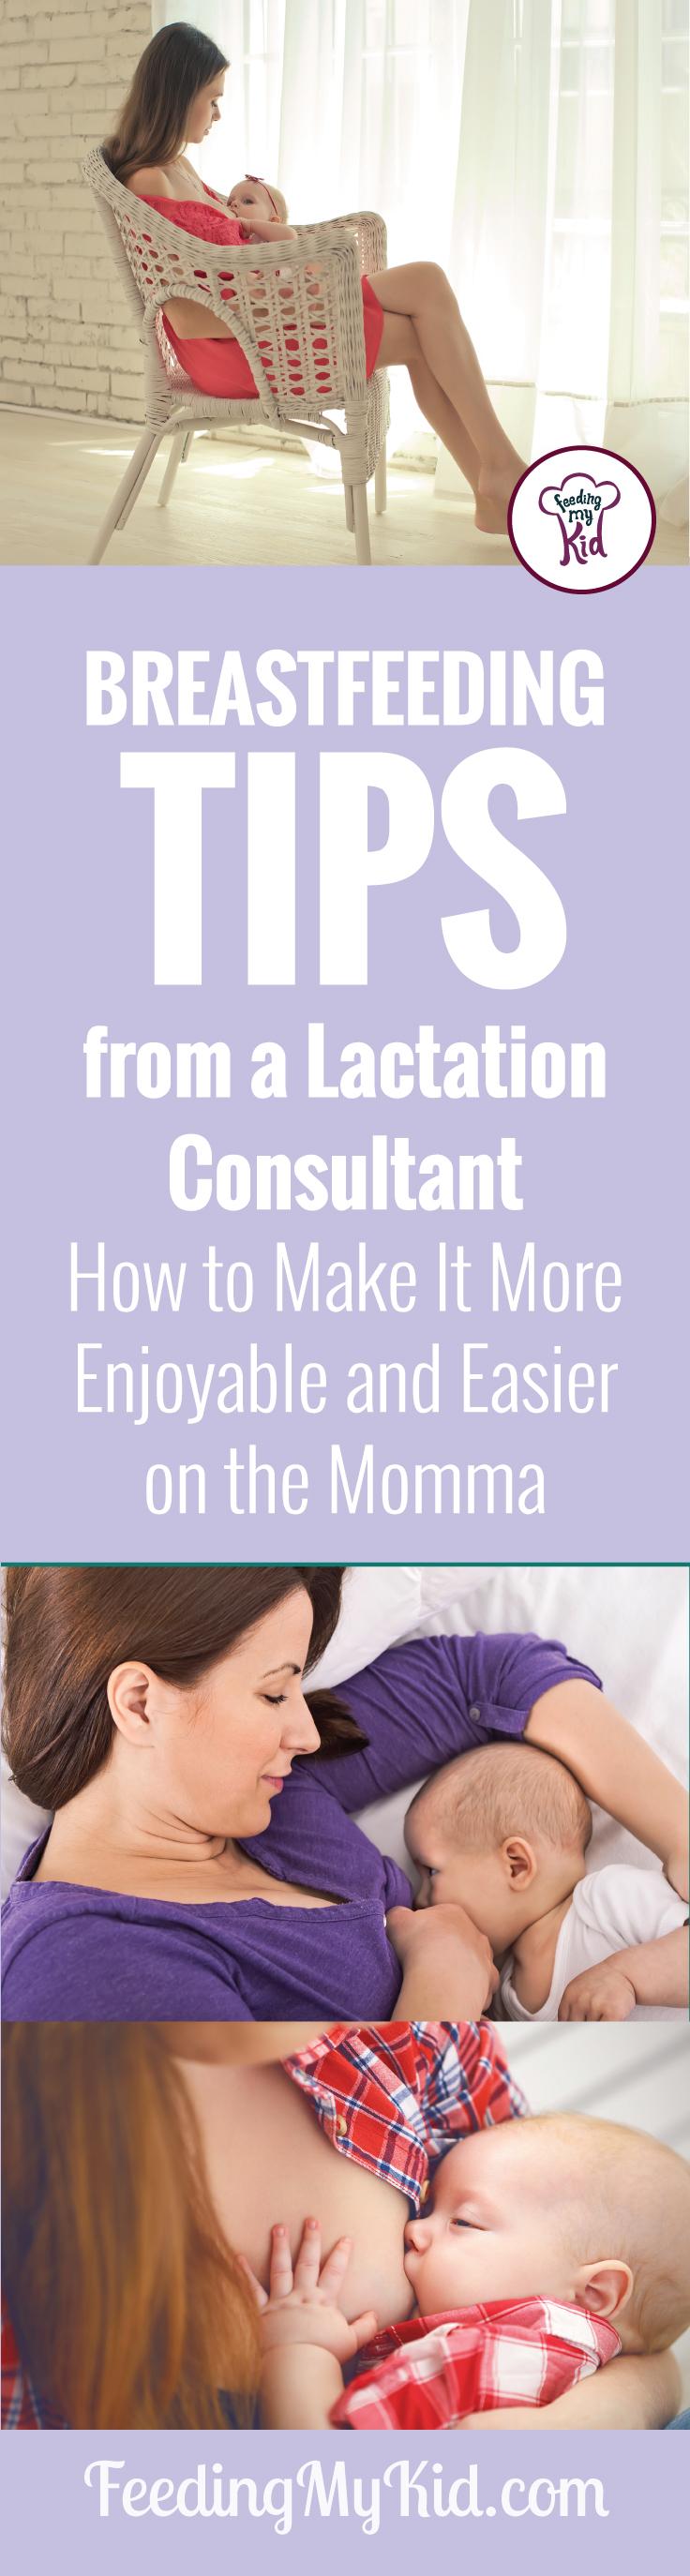 Orlando Lactation Consulting Tips from Kathy Bradley